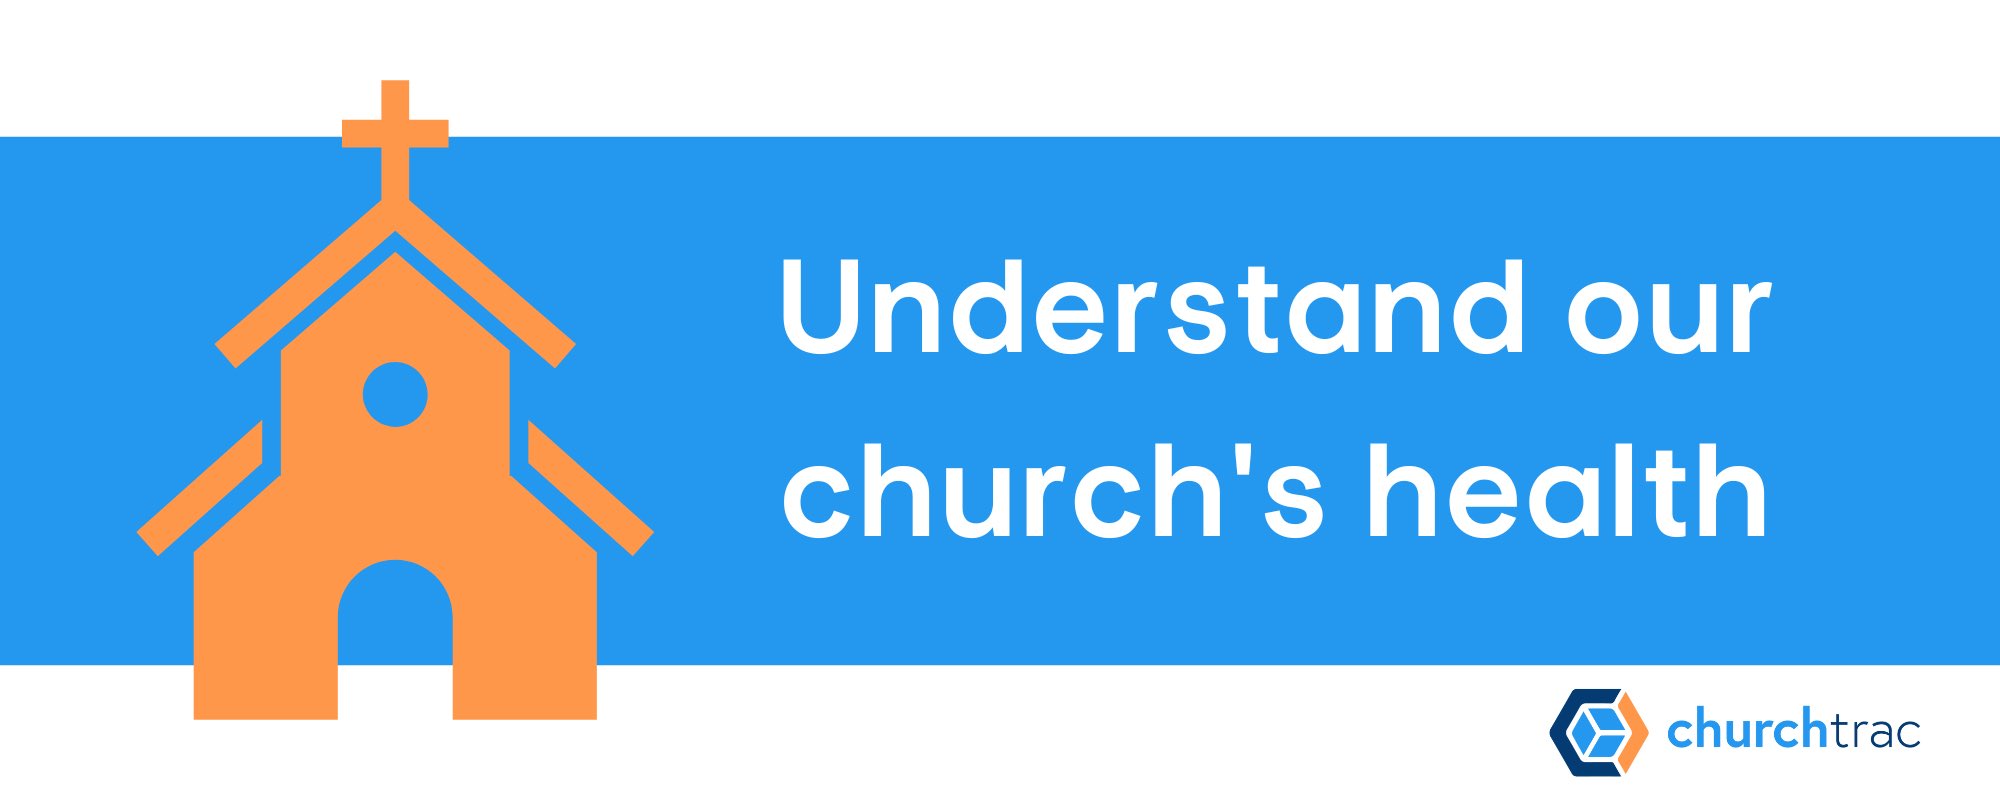 Why Track Church Attendance? To understand the health of our church